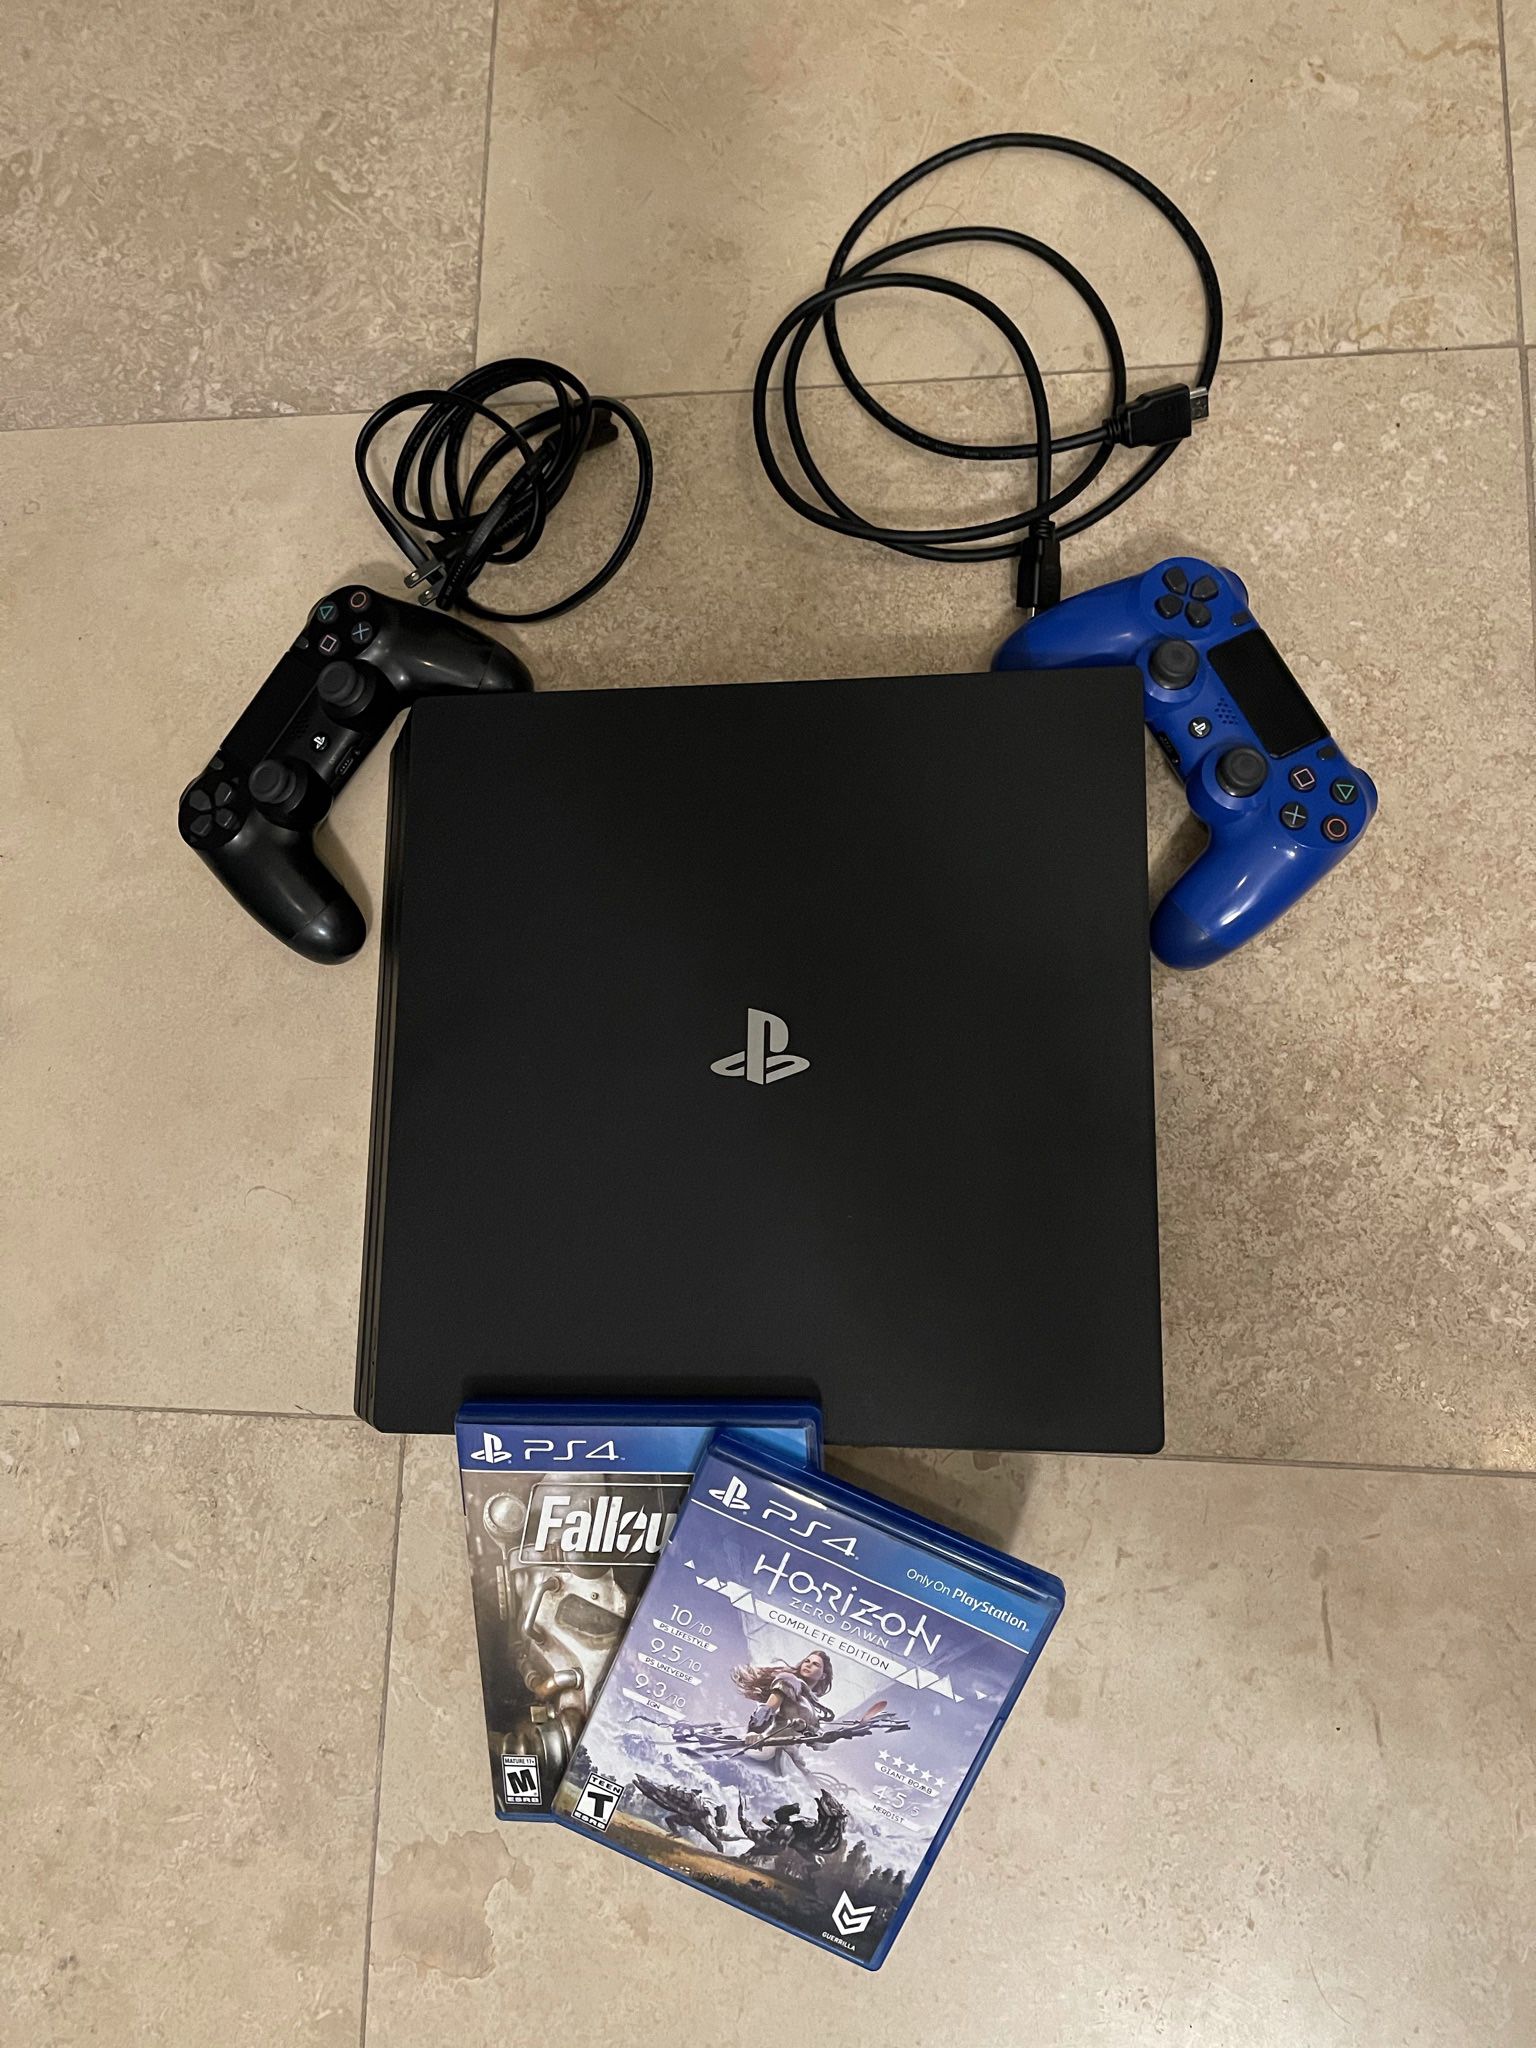 PS4 Pro w/ 2 controllers and 2 games